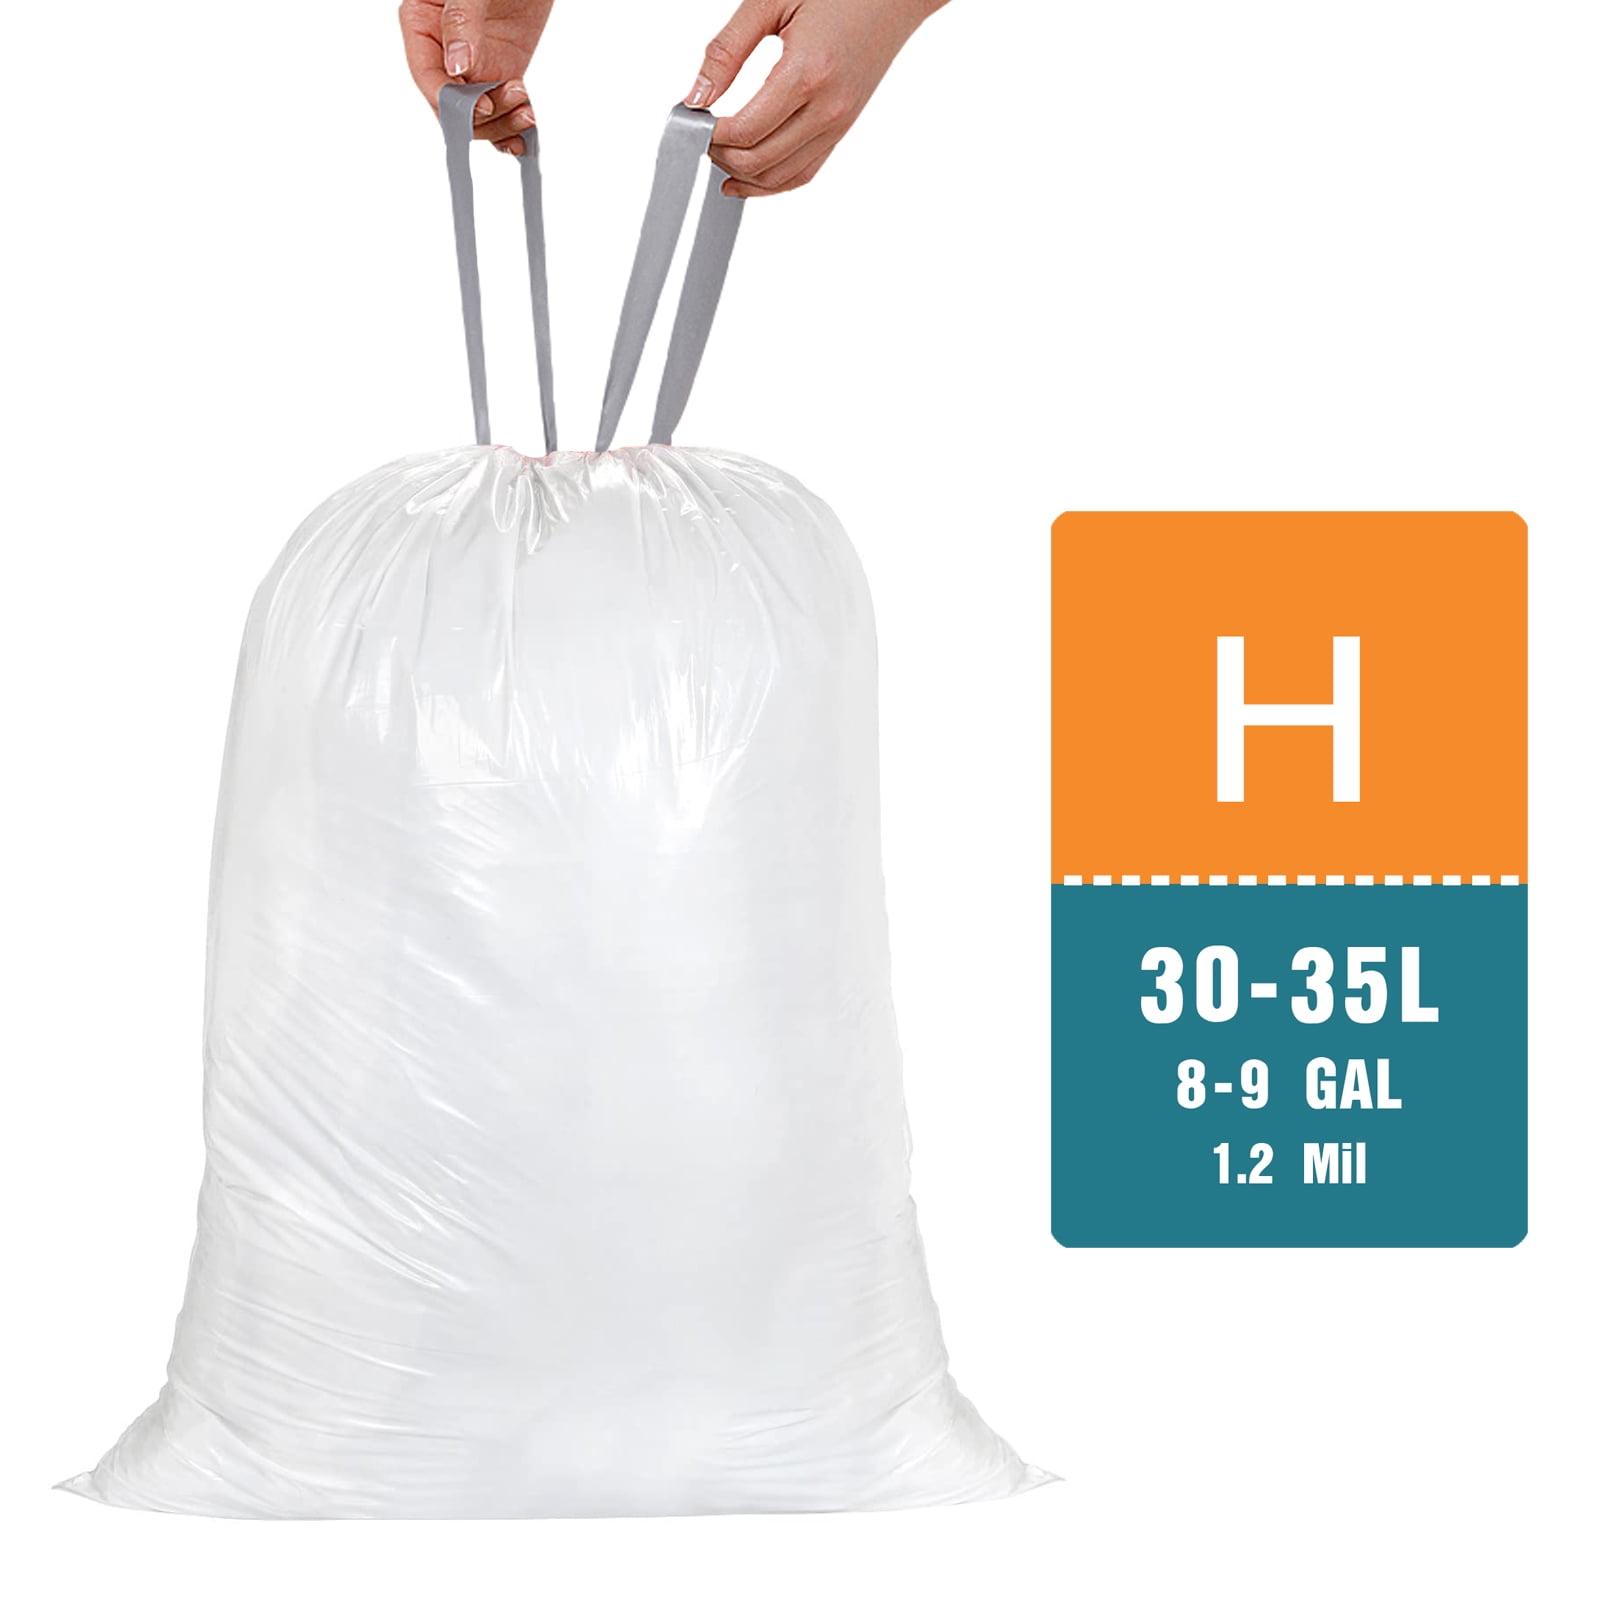  Reliable1st Code K Heavy Duty Trash Bags for 9-12 Gallon/35-45  Liter Drawstring, 1.2 Mil Heavy Duty (50 Count)